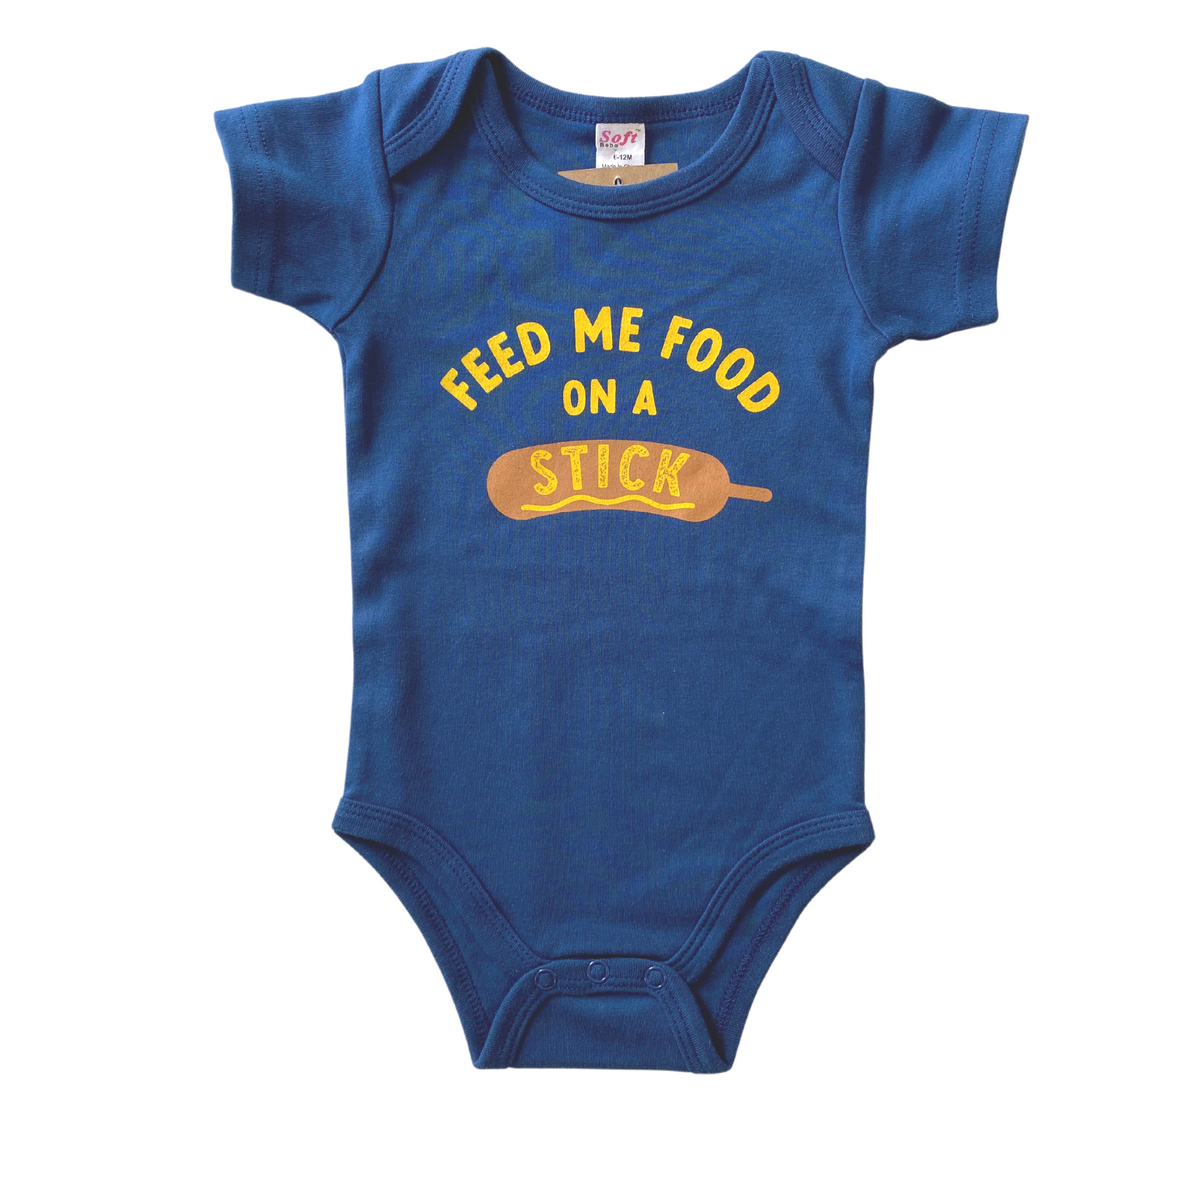 Feed me Food on a Stick baby bodysuit